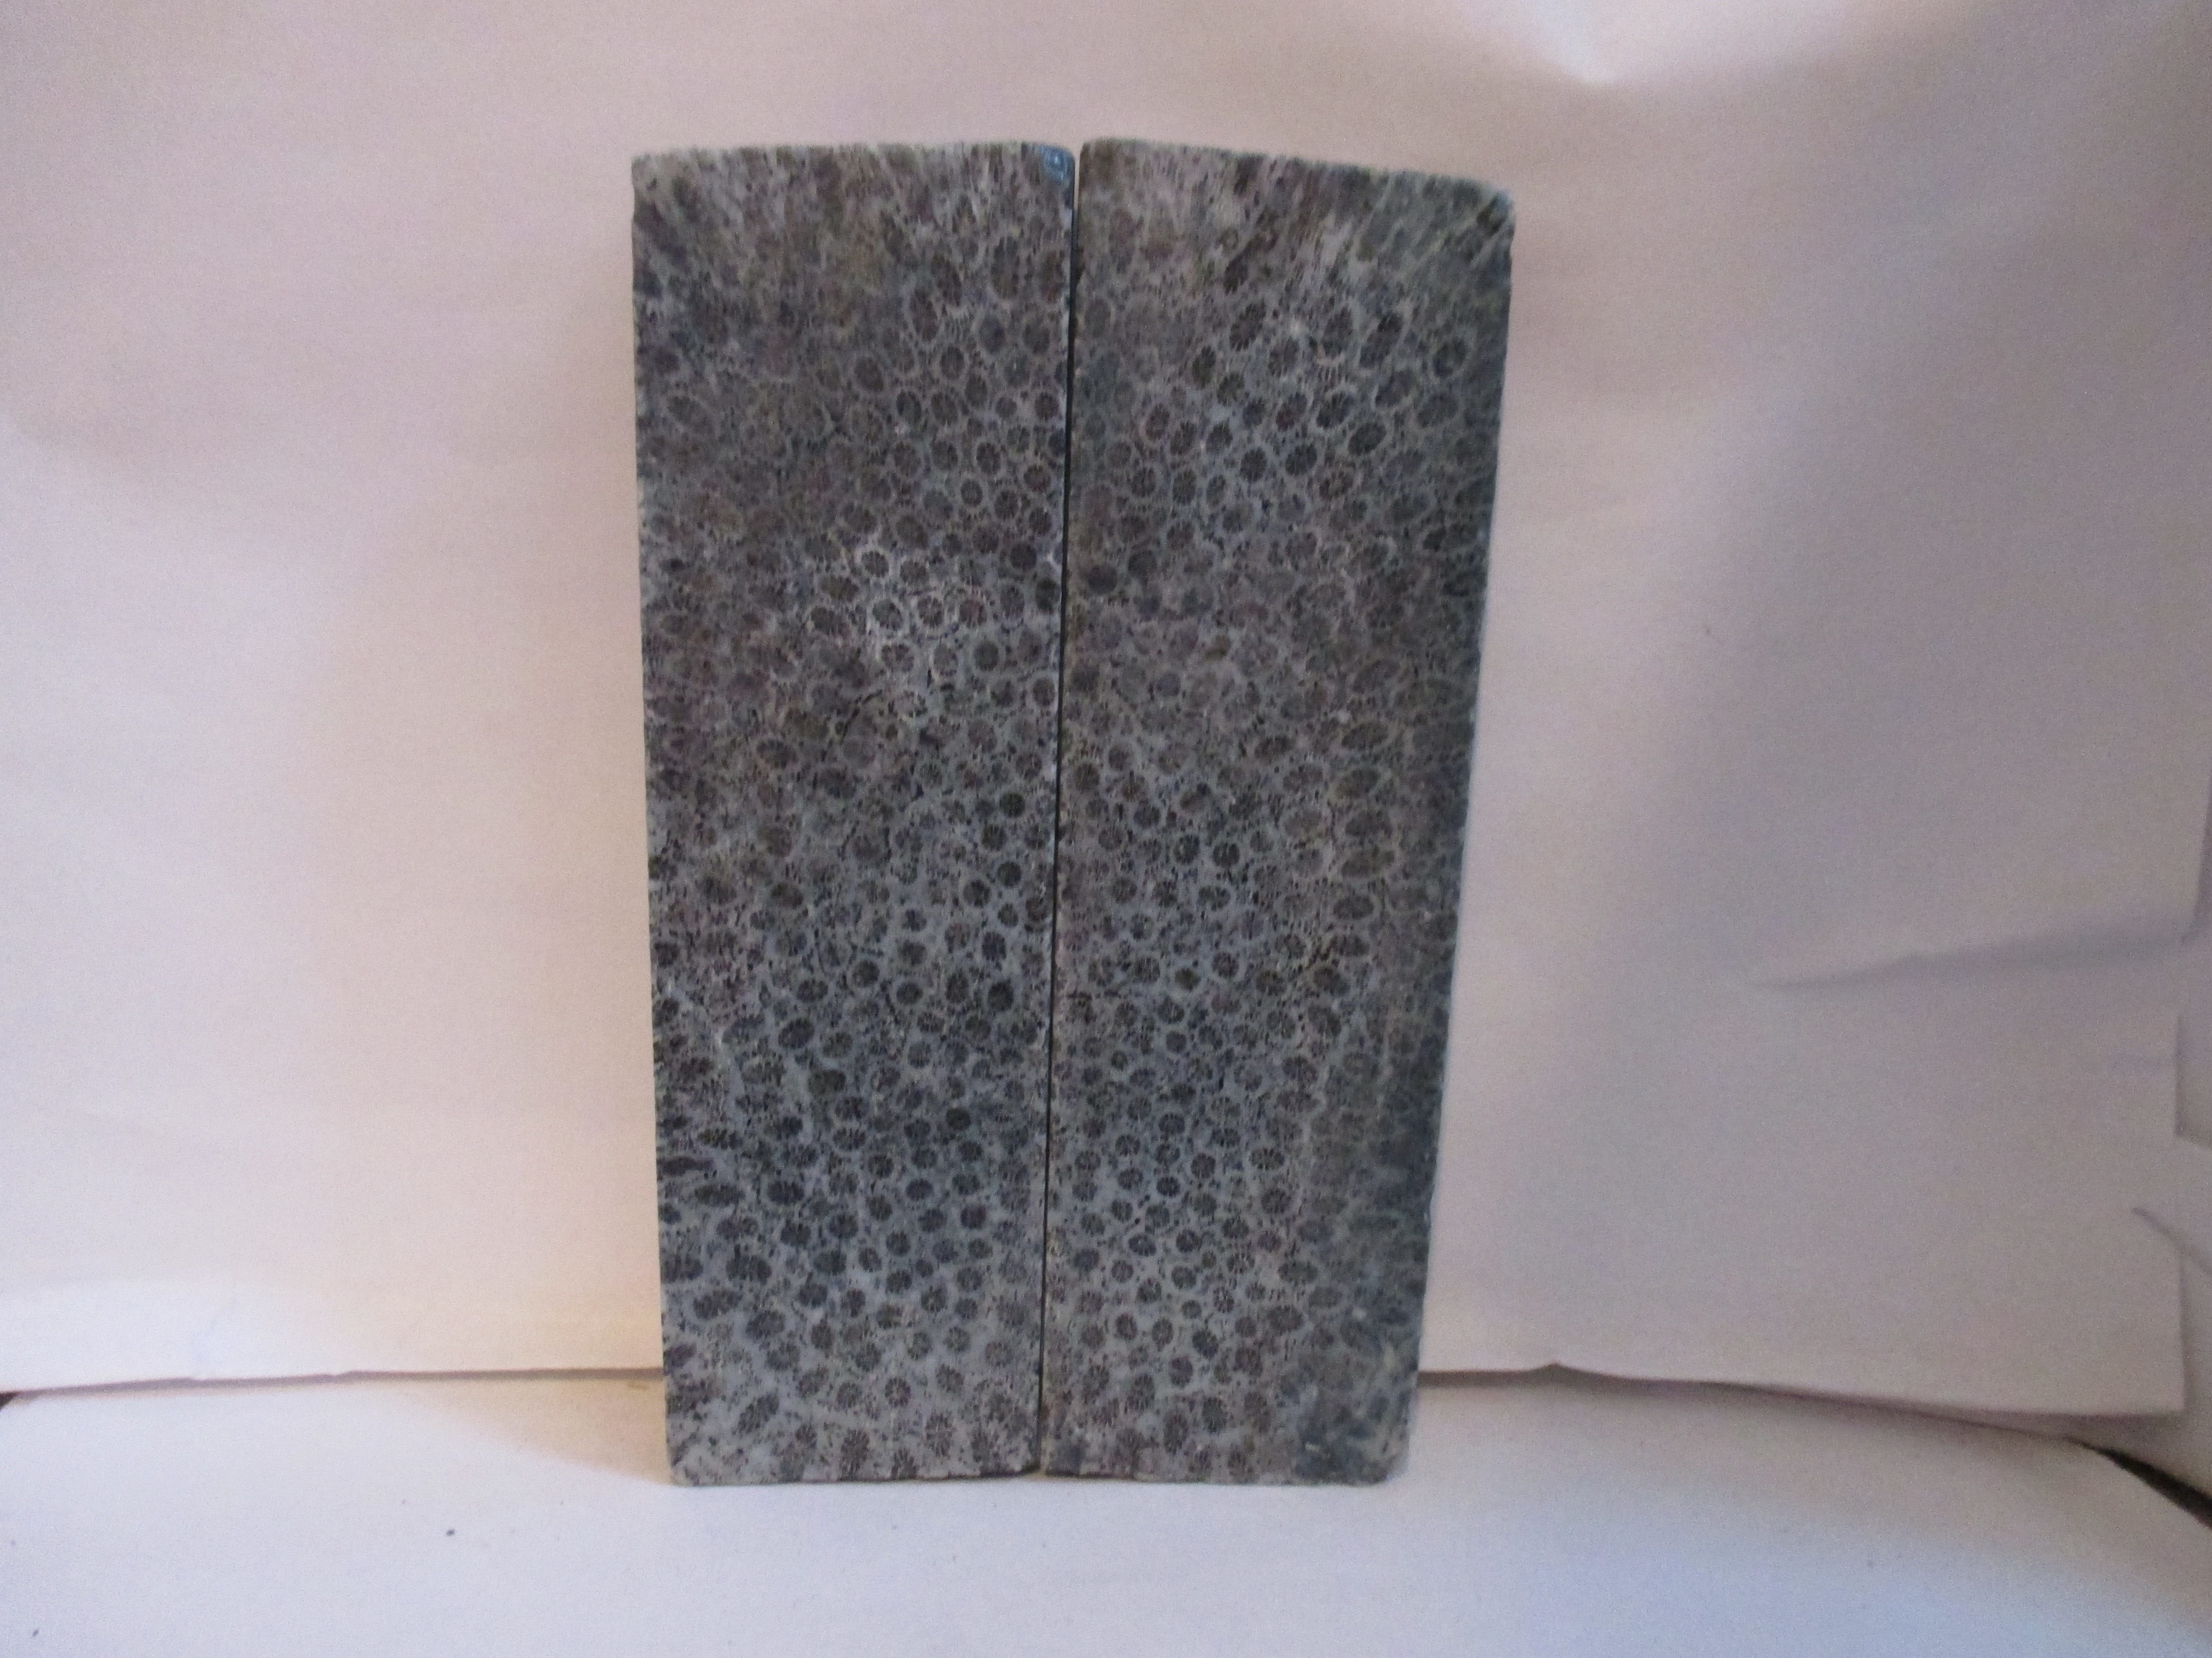 FOSSIL CORAL SCALES               5 X 1-1/2 X 1/4